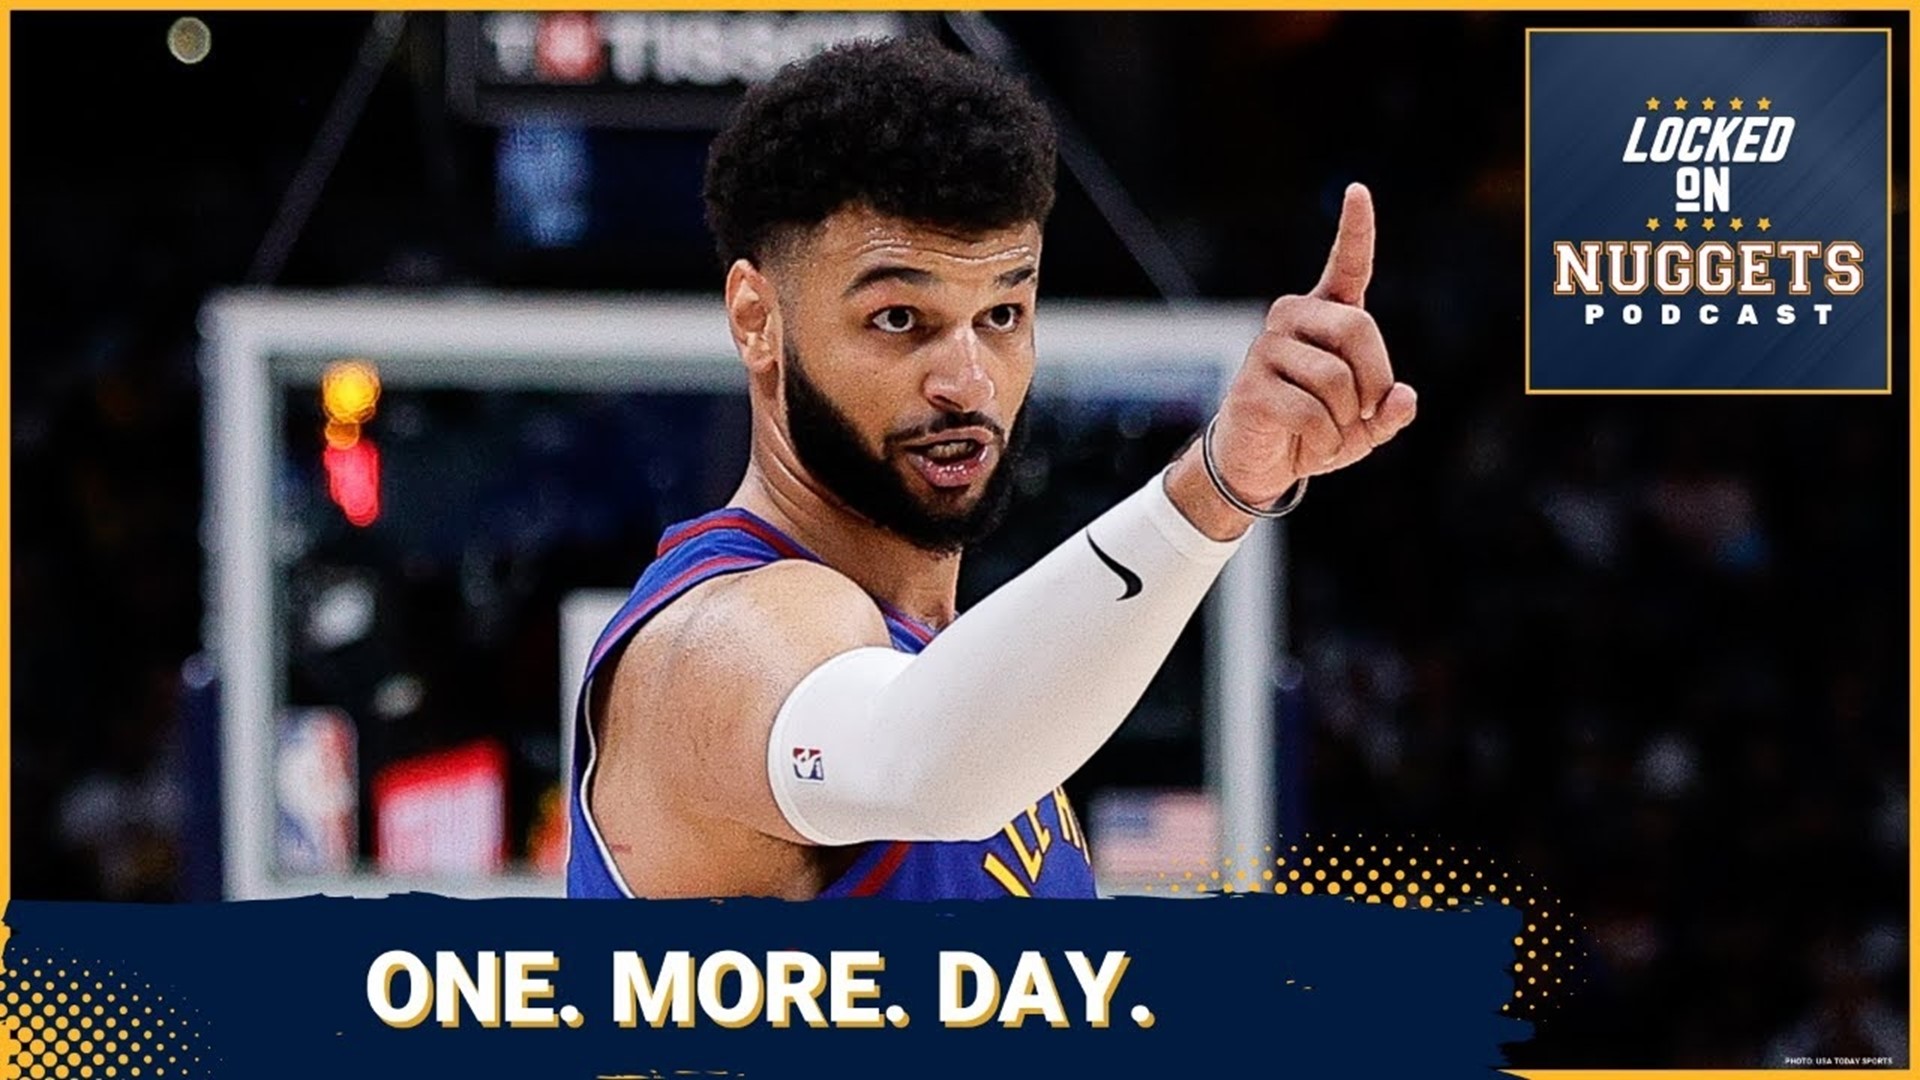 The Denver Nuggets take on the LA Lakers in game one of the playoffs. The time for talking is over and game time is here.